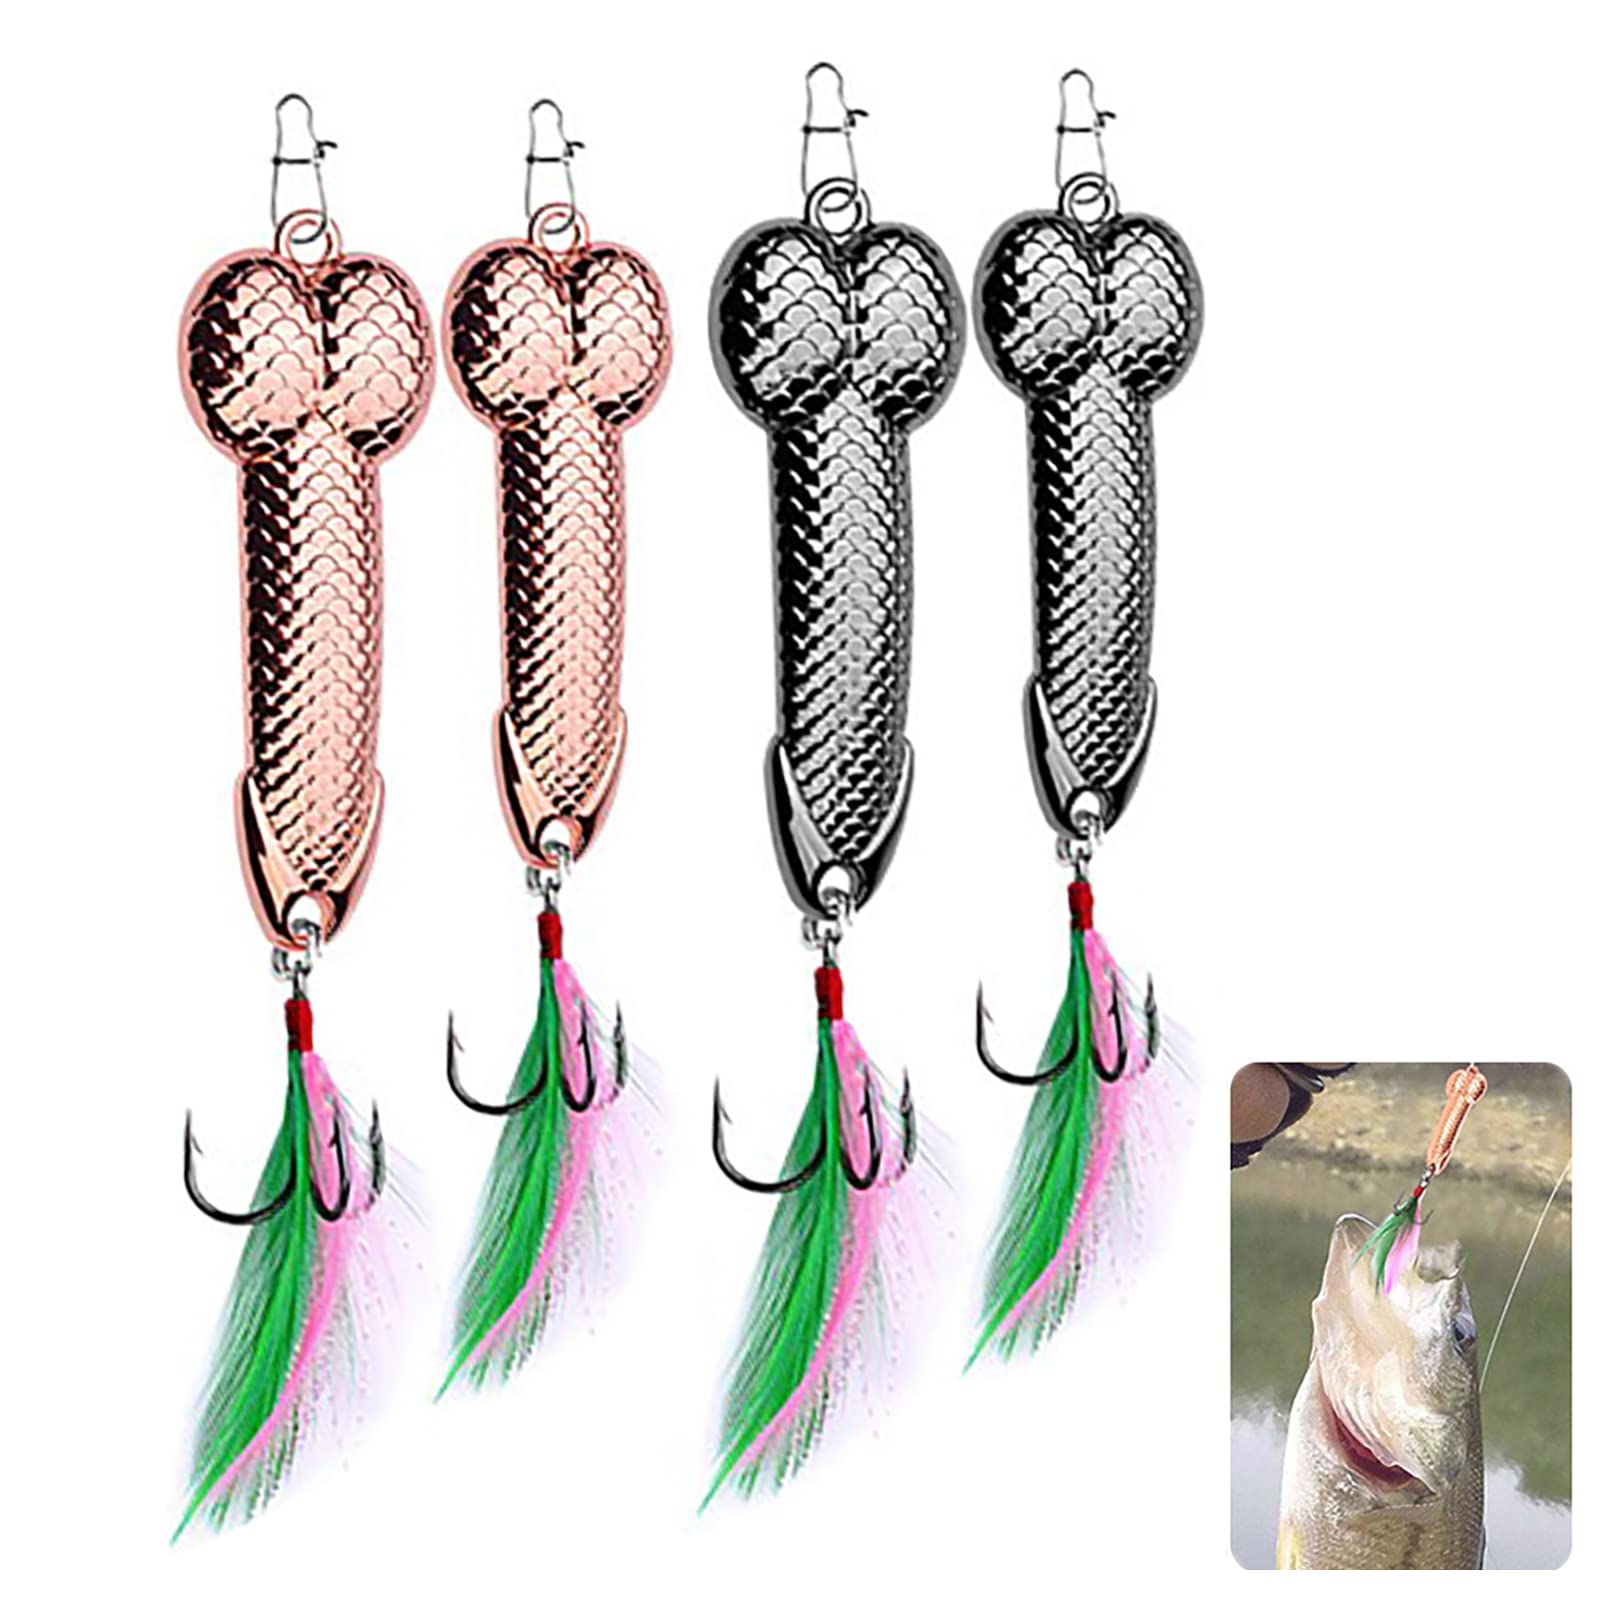 4PCS Fishing Lures Fishing Spoons,Special Shaped Hard Metal Sequin Fishing  Jigs Baits,JoyFishing Spoof Gifts Wobble Feathers Fishing Hook for  Freshwater Fishing Lovers Texture